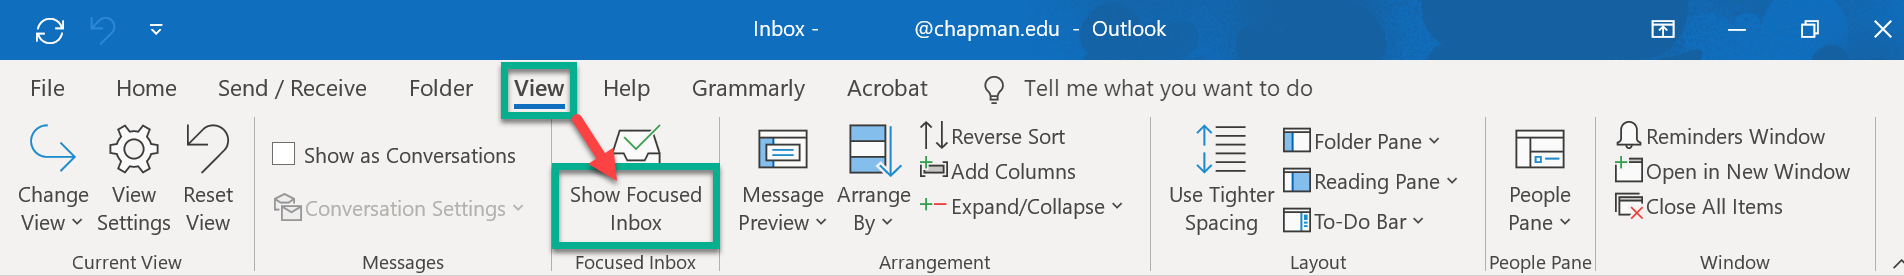 Image of the Outlook ribbon menu with a green square outlining VIEW with a read arrow pointing to the Focused Inbox icon.